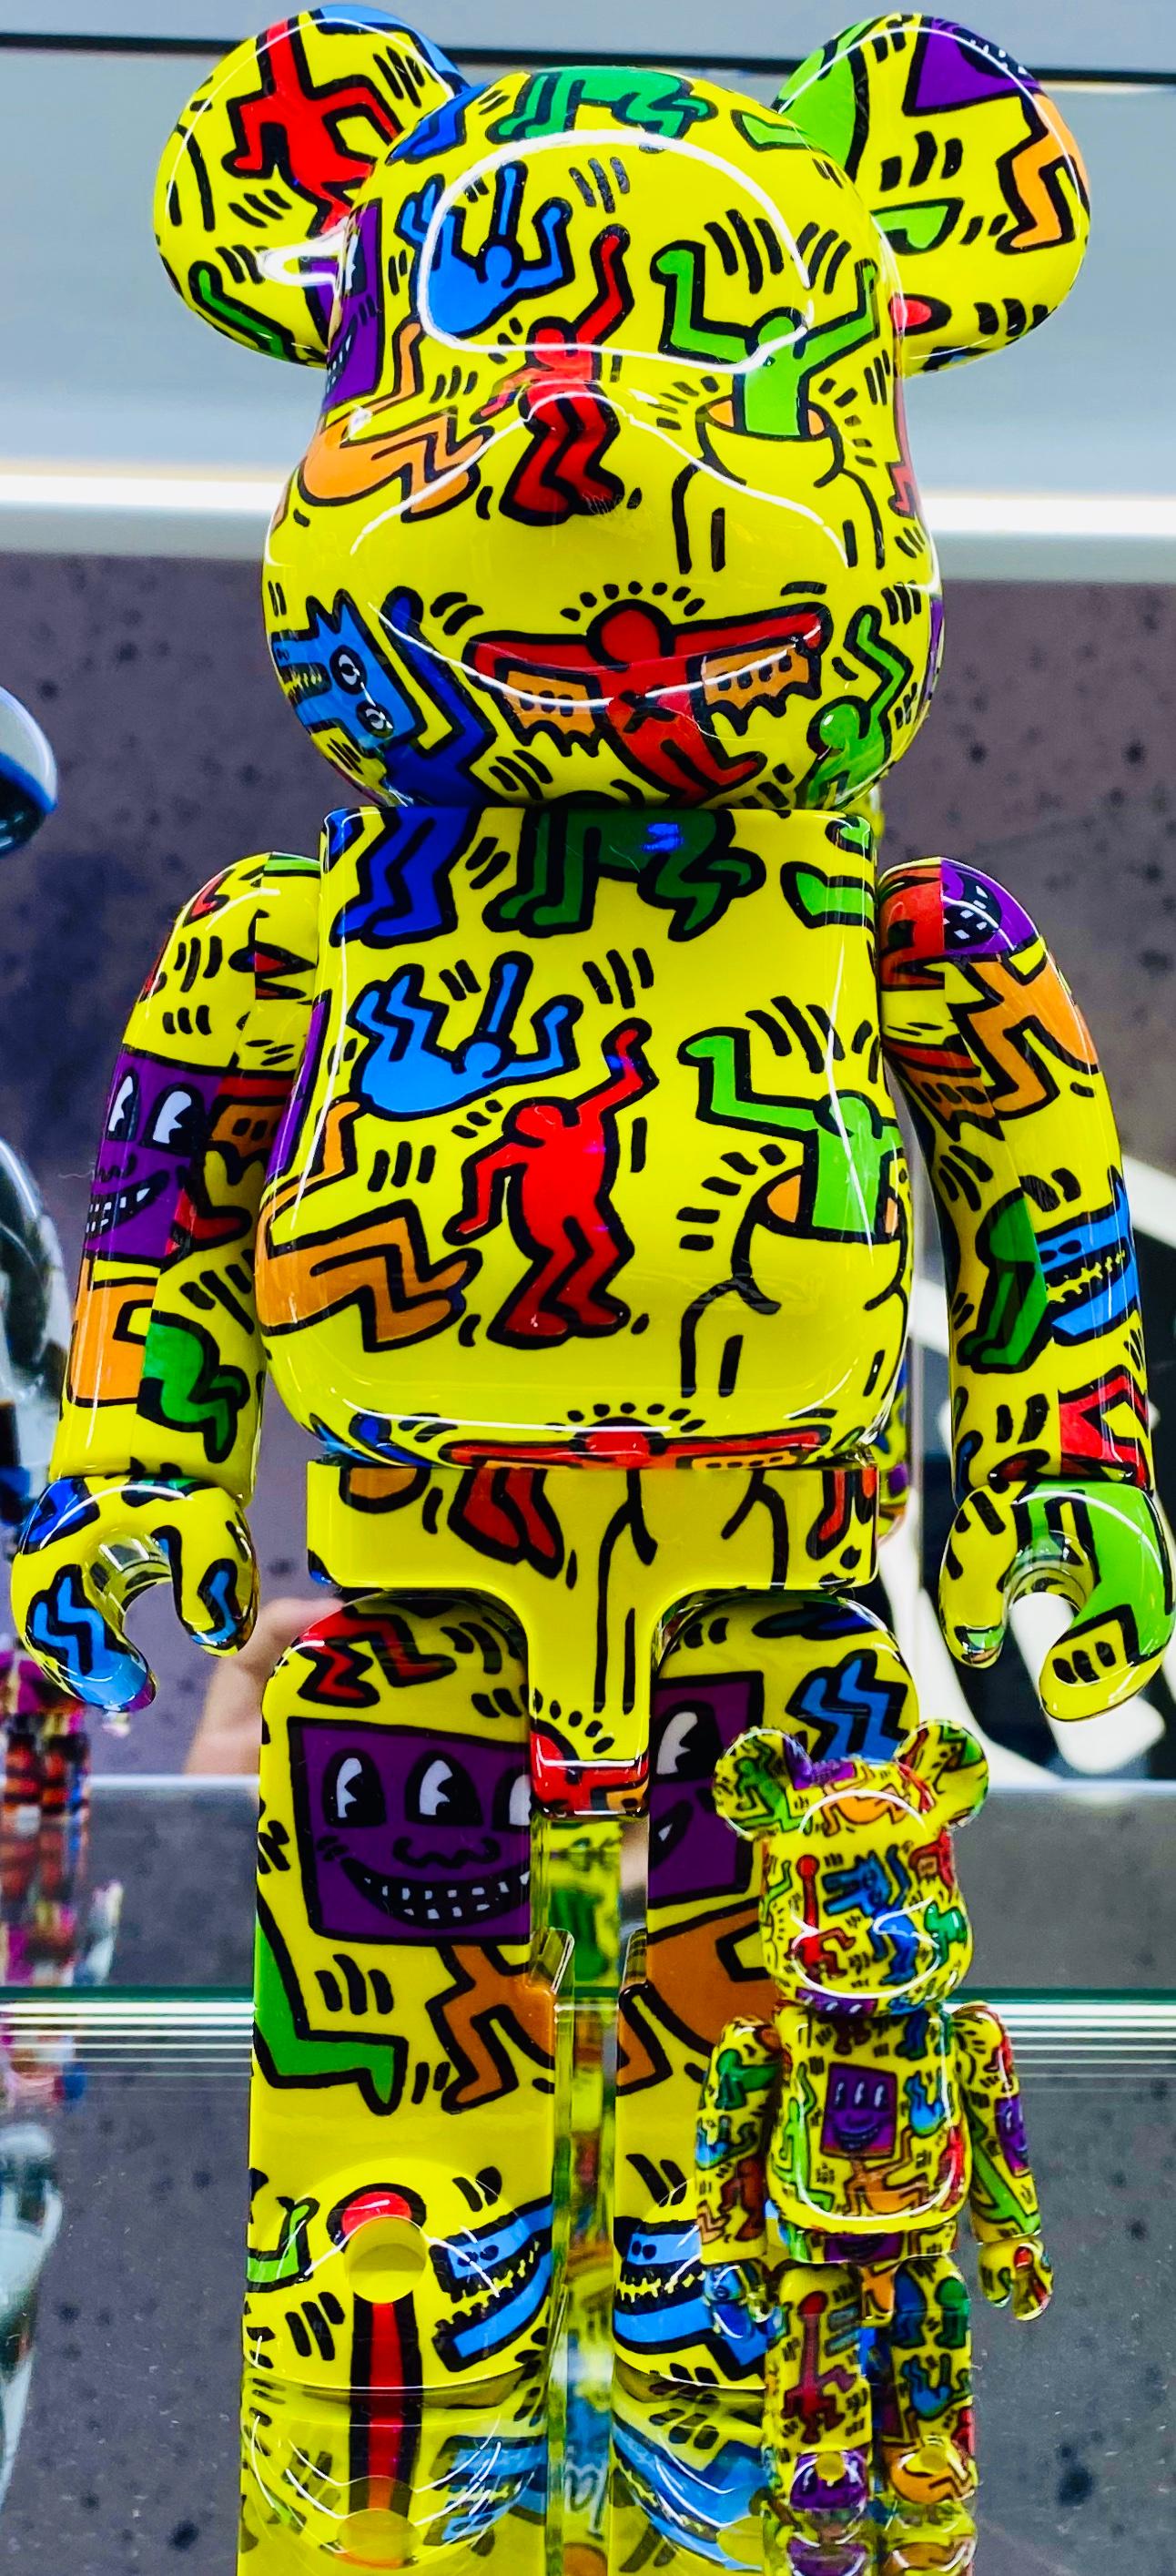 Figurative Sculpture (after) Keith Haring - Keith Haring Bearbrick 400 % Companion (Haring BE@RBRICK)